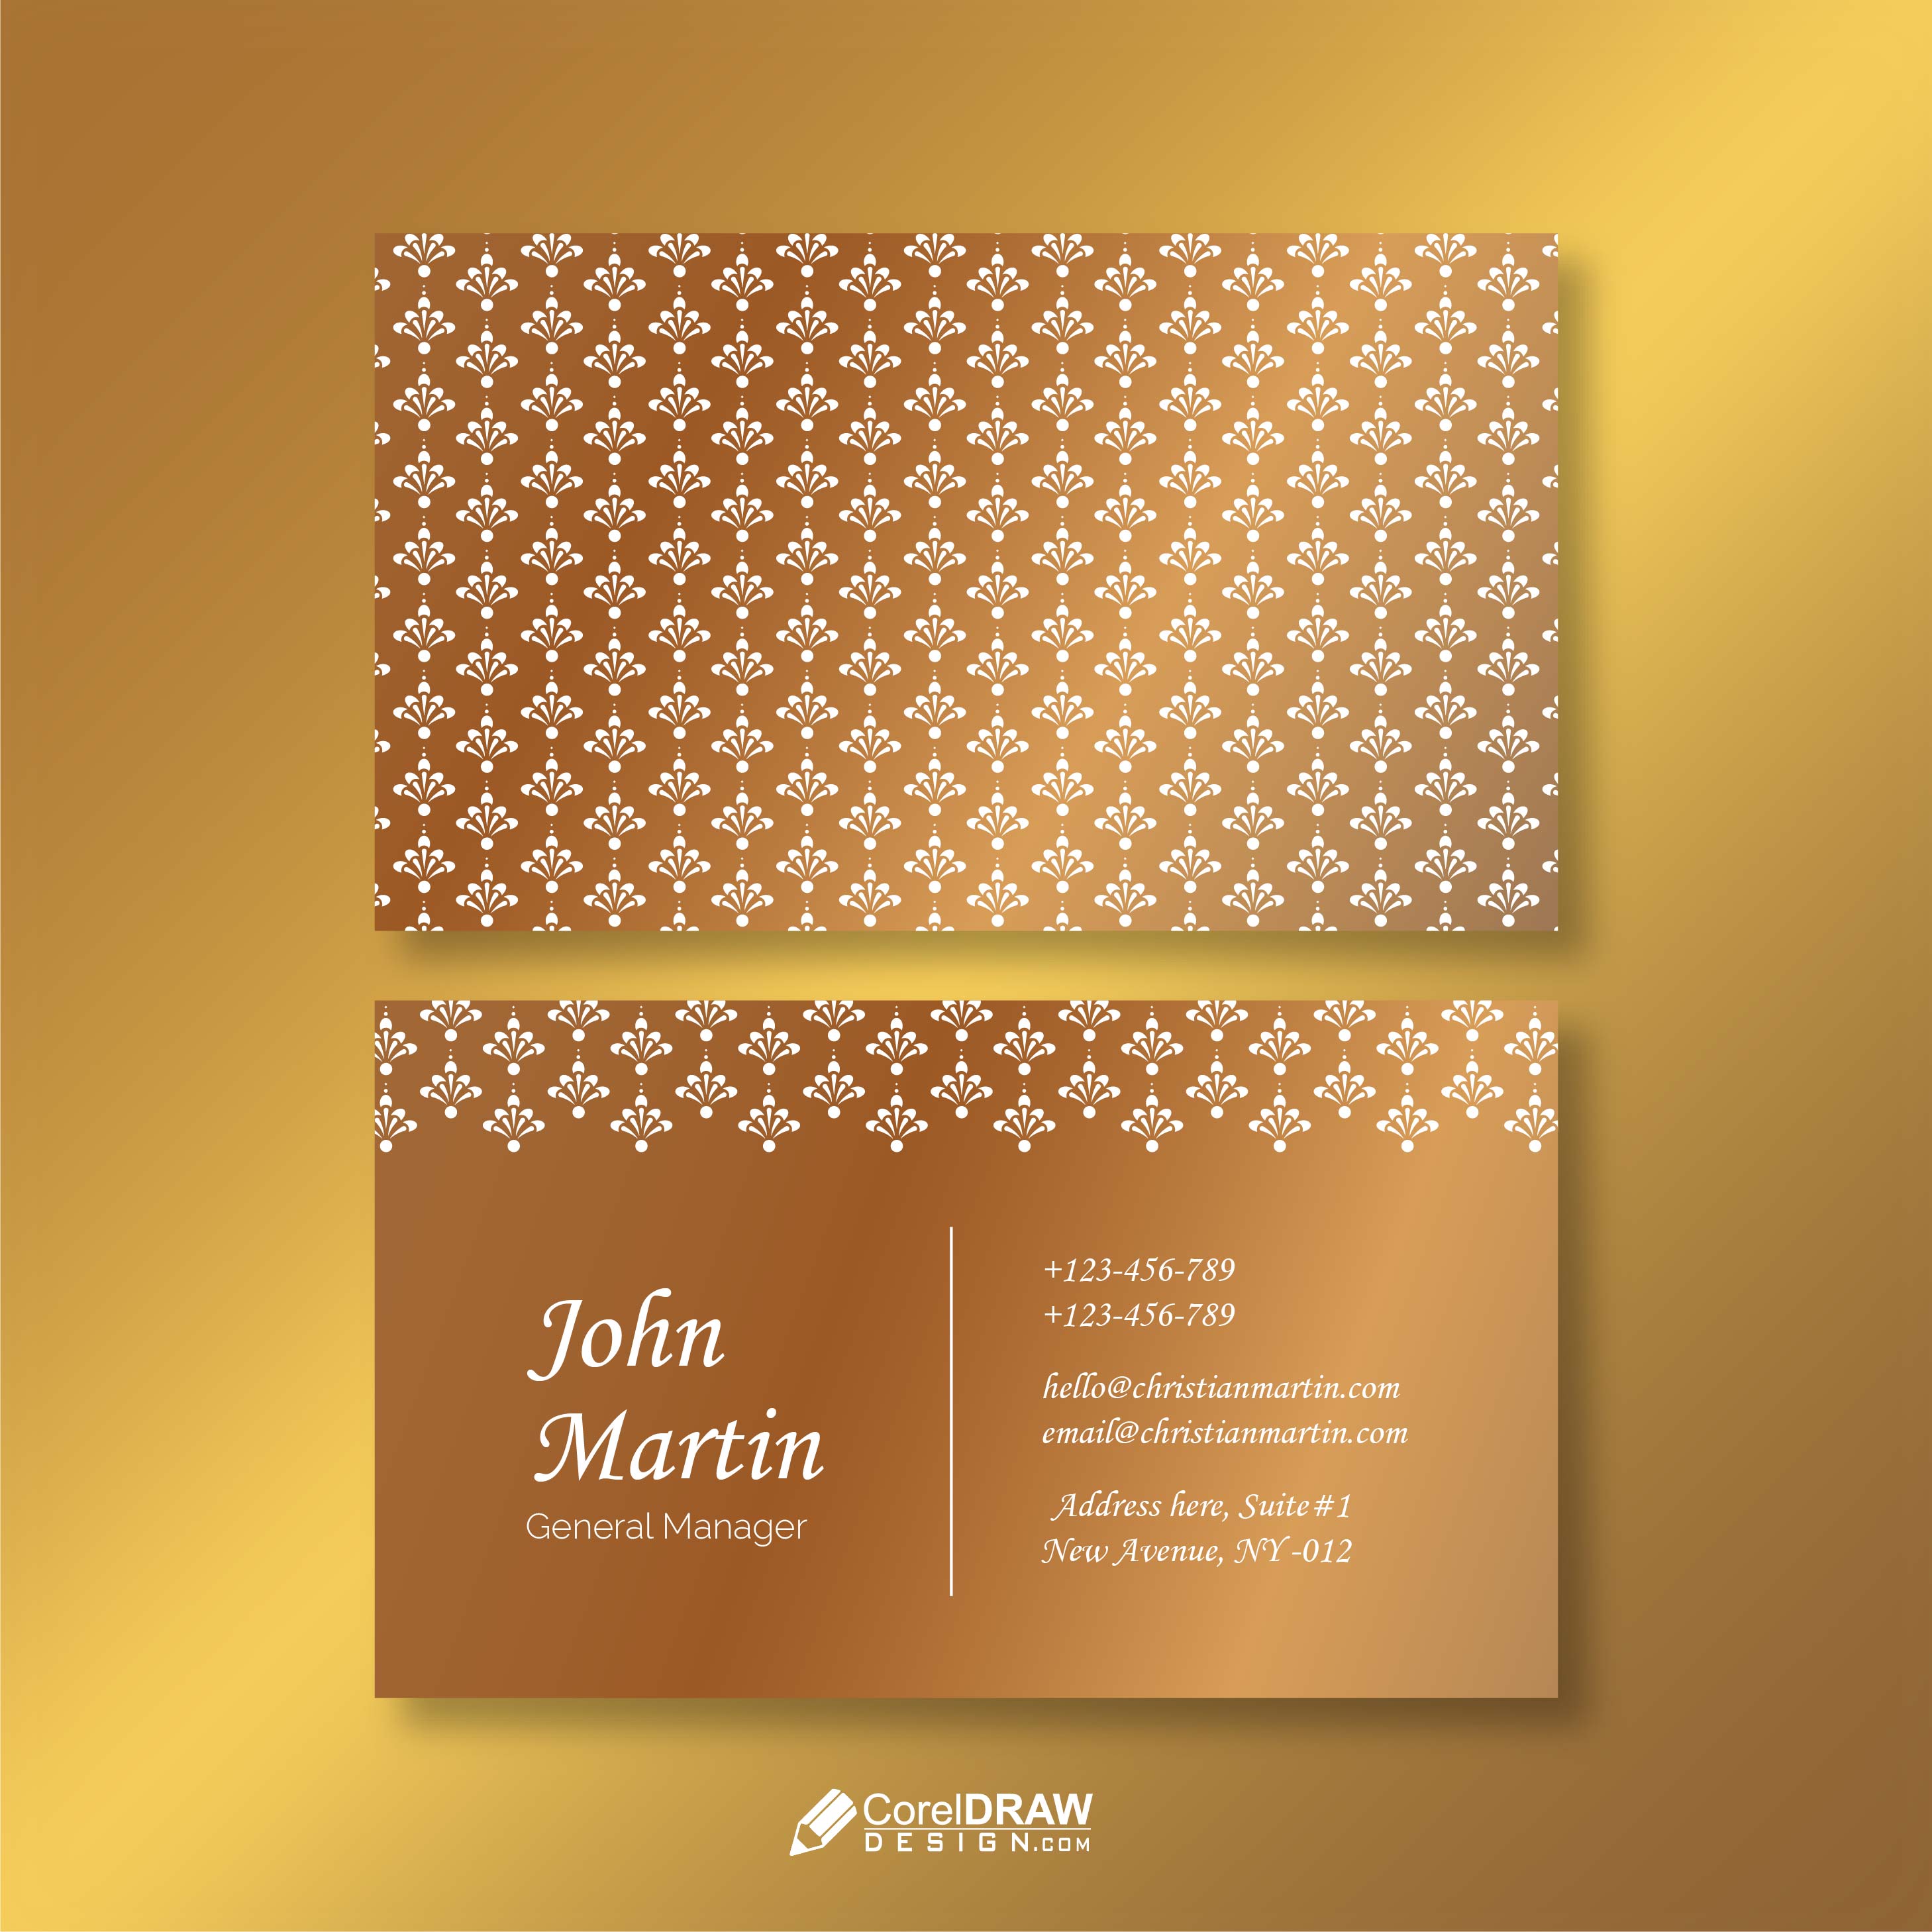 Abstract Royal Luxury Business Card Vector